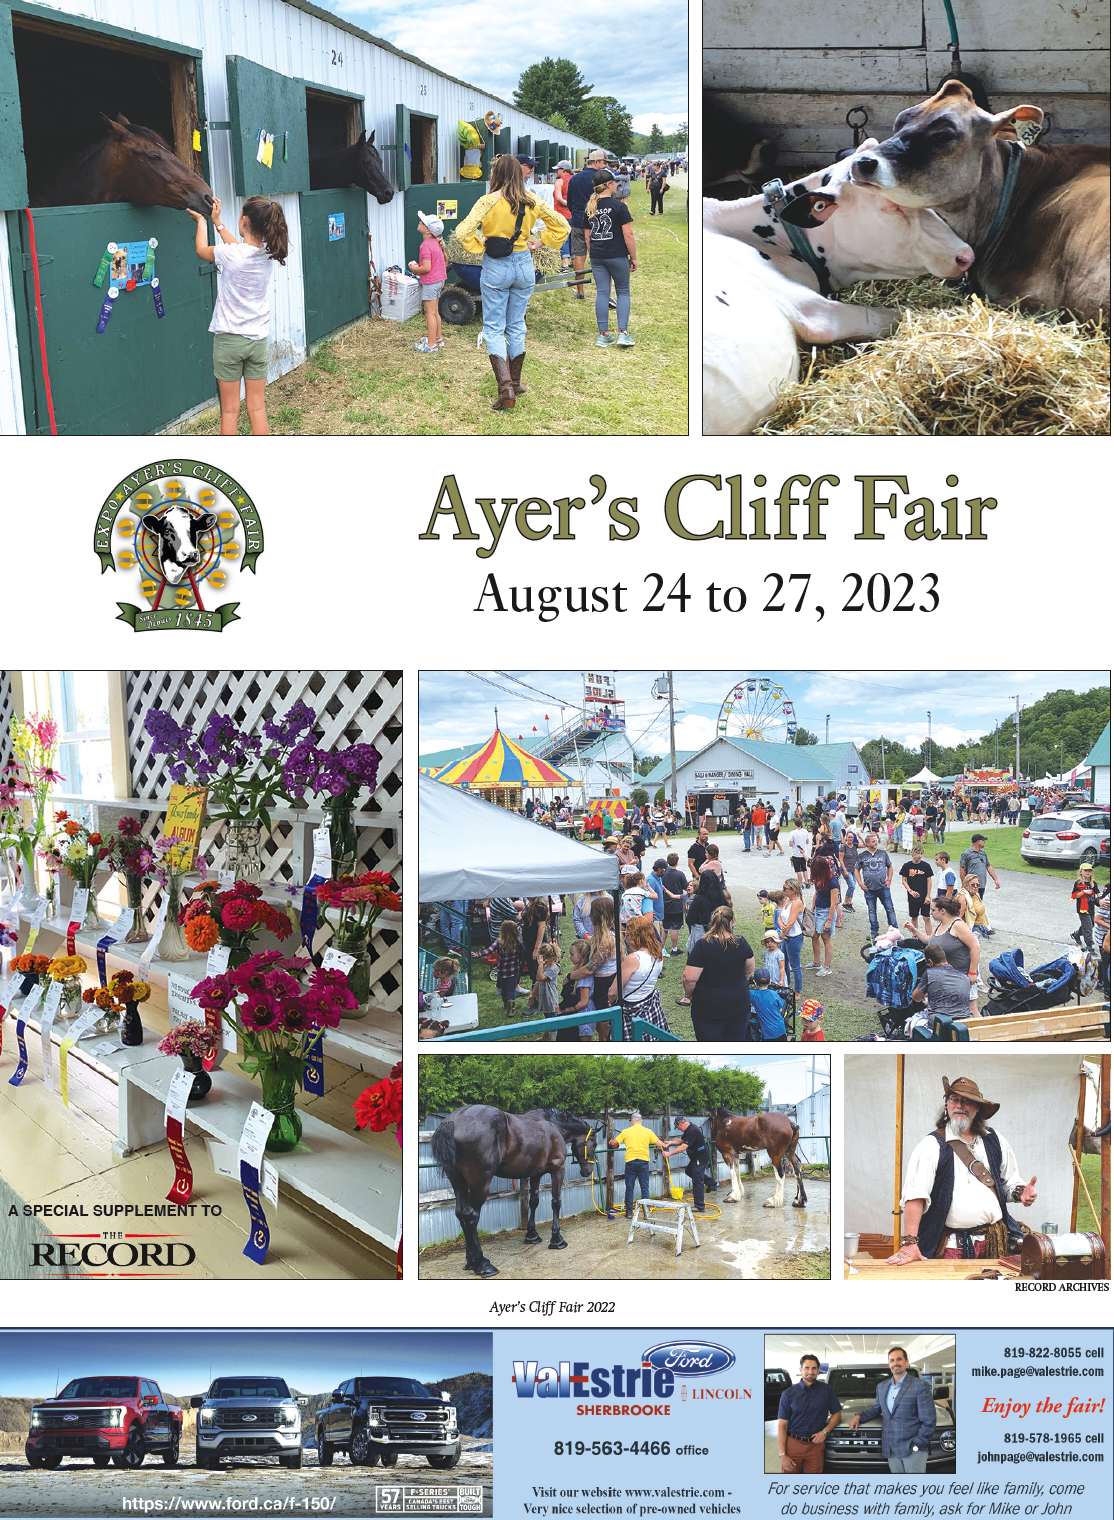 Ayer’s Cliff Fair August 24 to 27, 2023